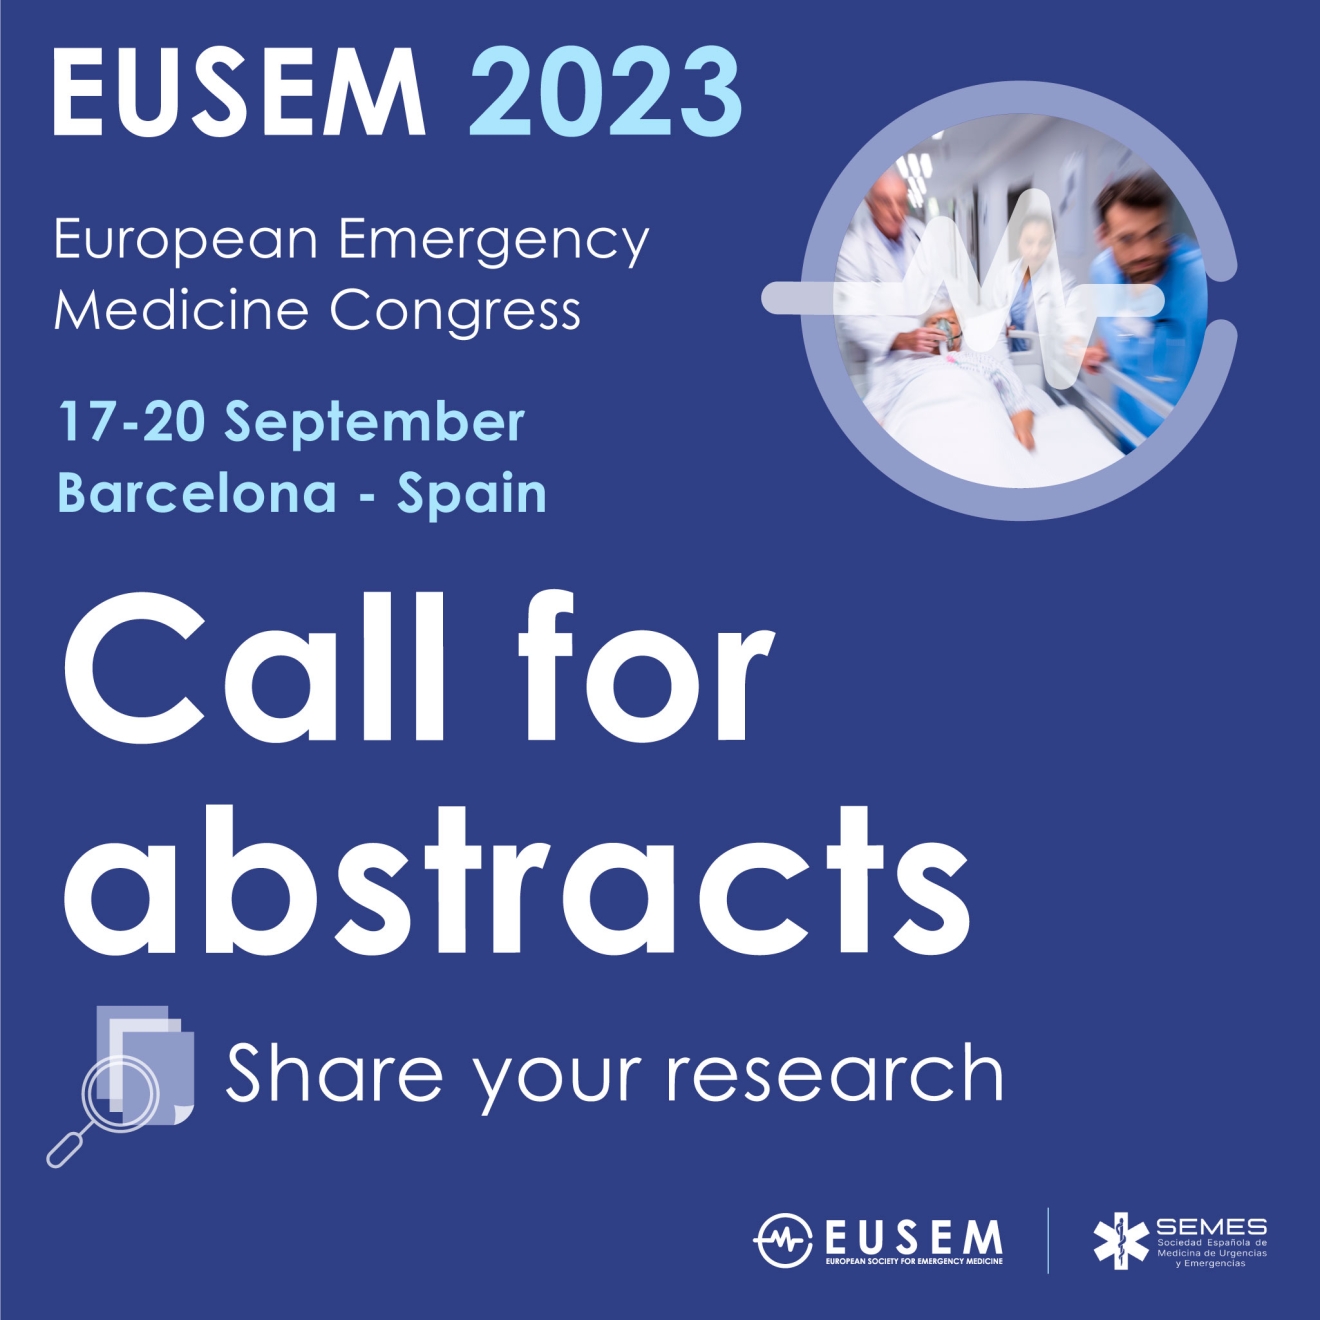 Call for abstracts!